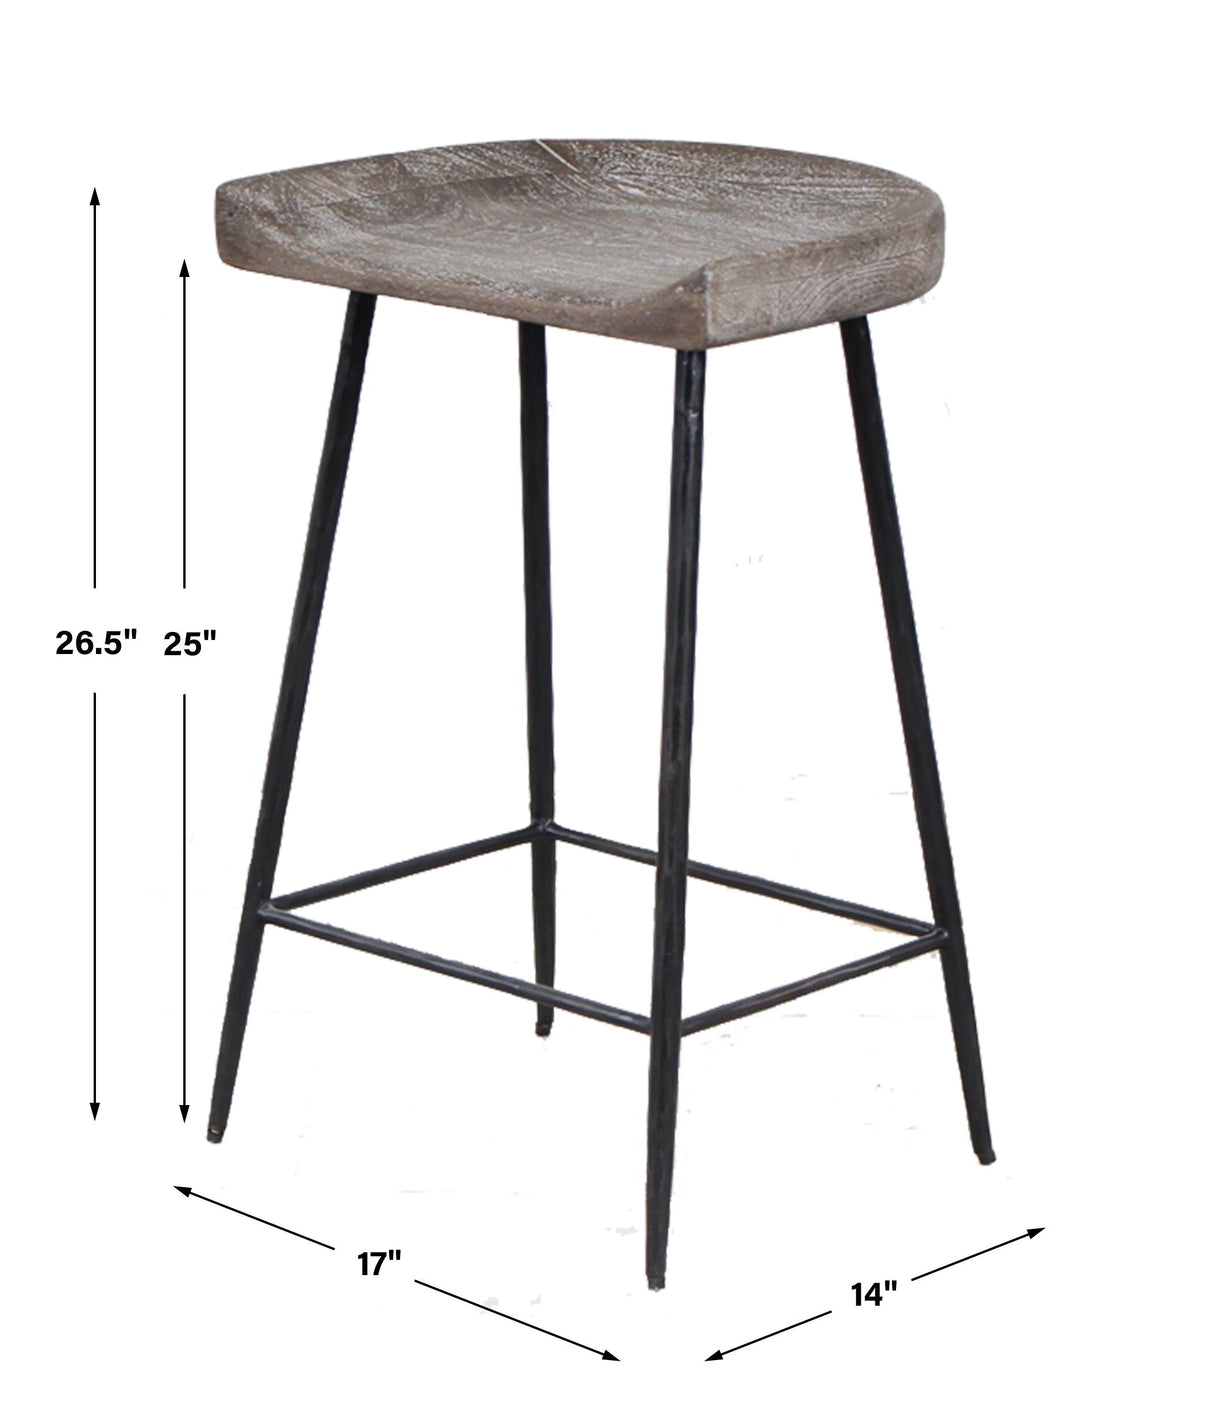 Cordova - Carved Wood Counter Stool